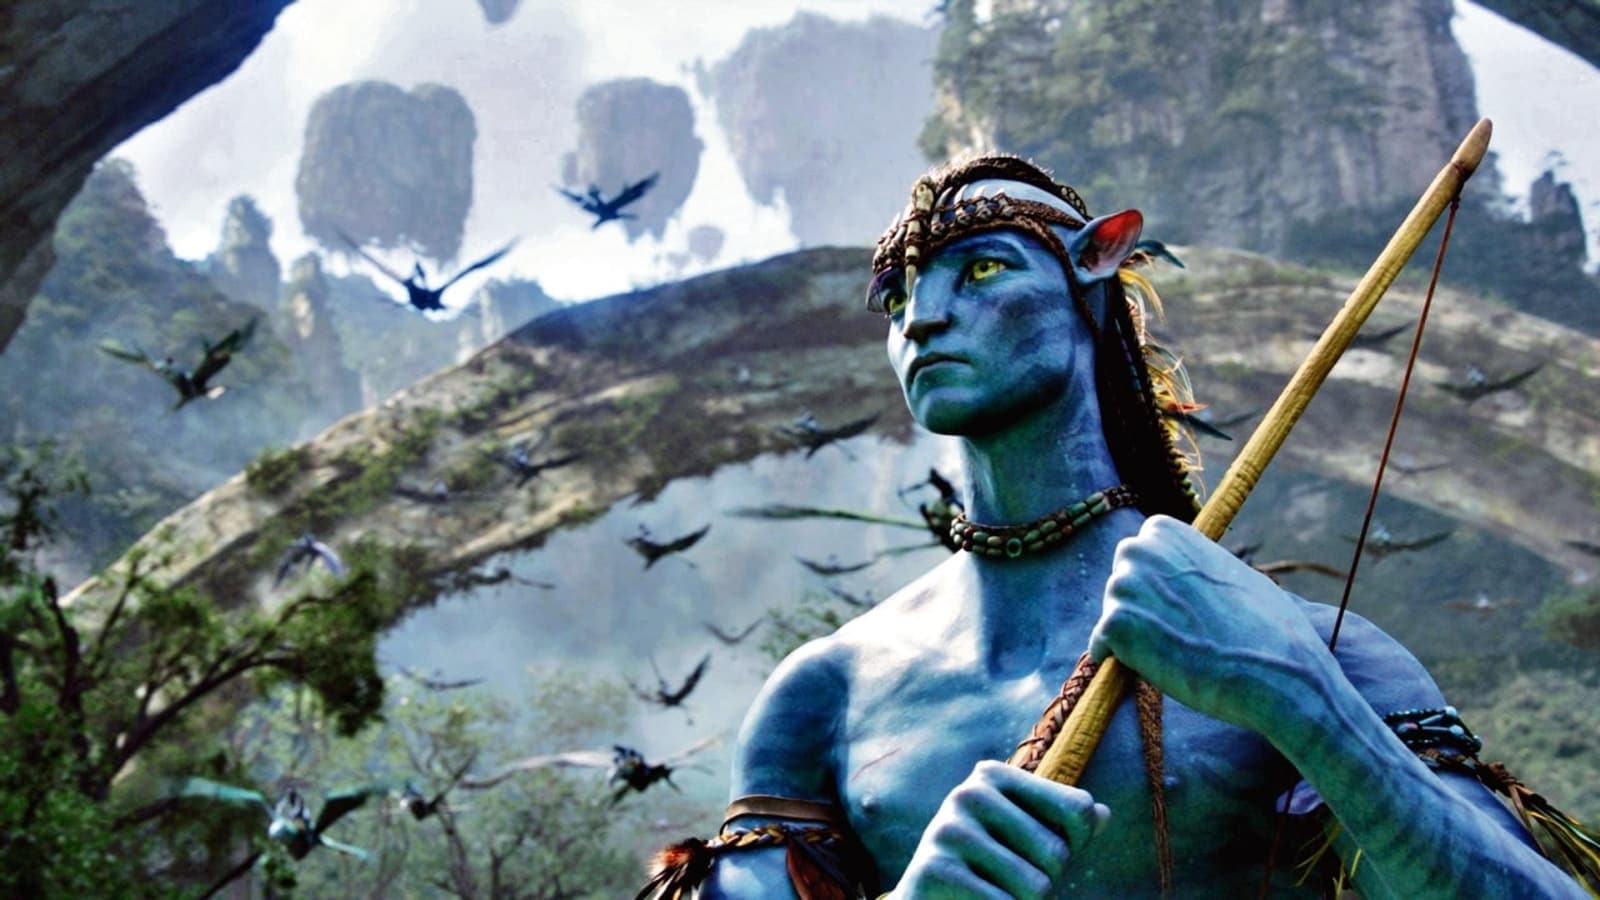 Avatar re-release earns ₹1 crore in advance bookings in India, targets -20 million opening globally